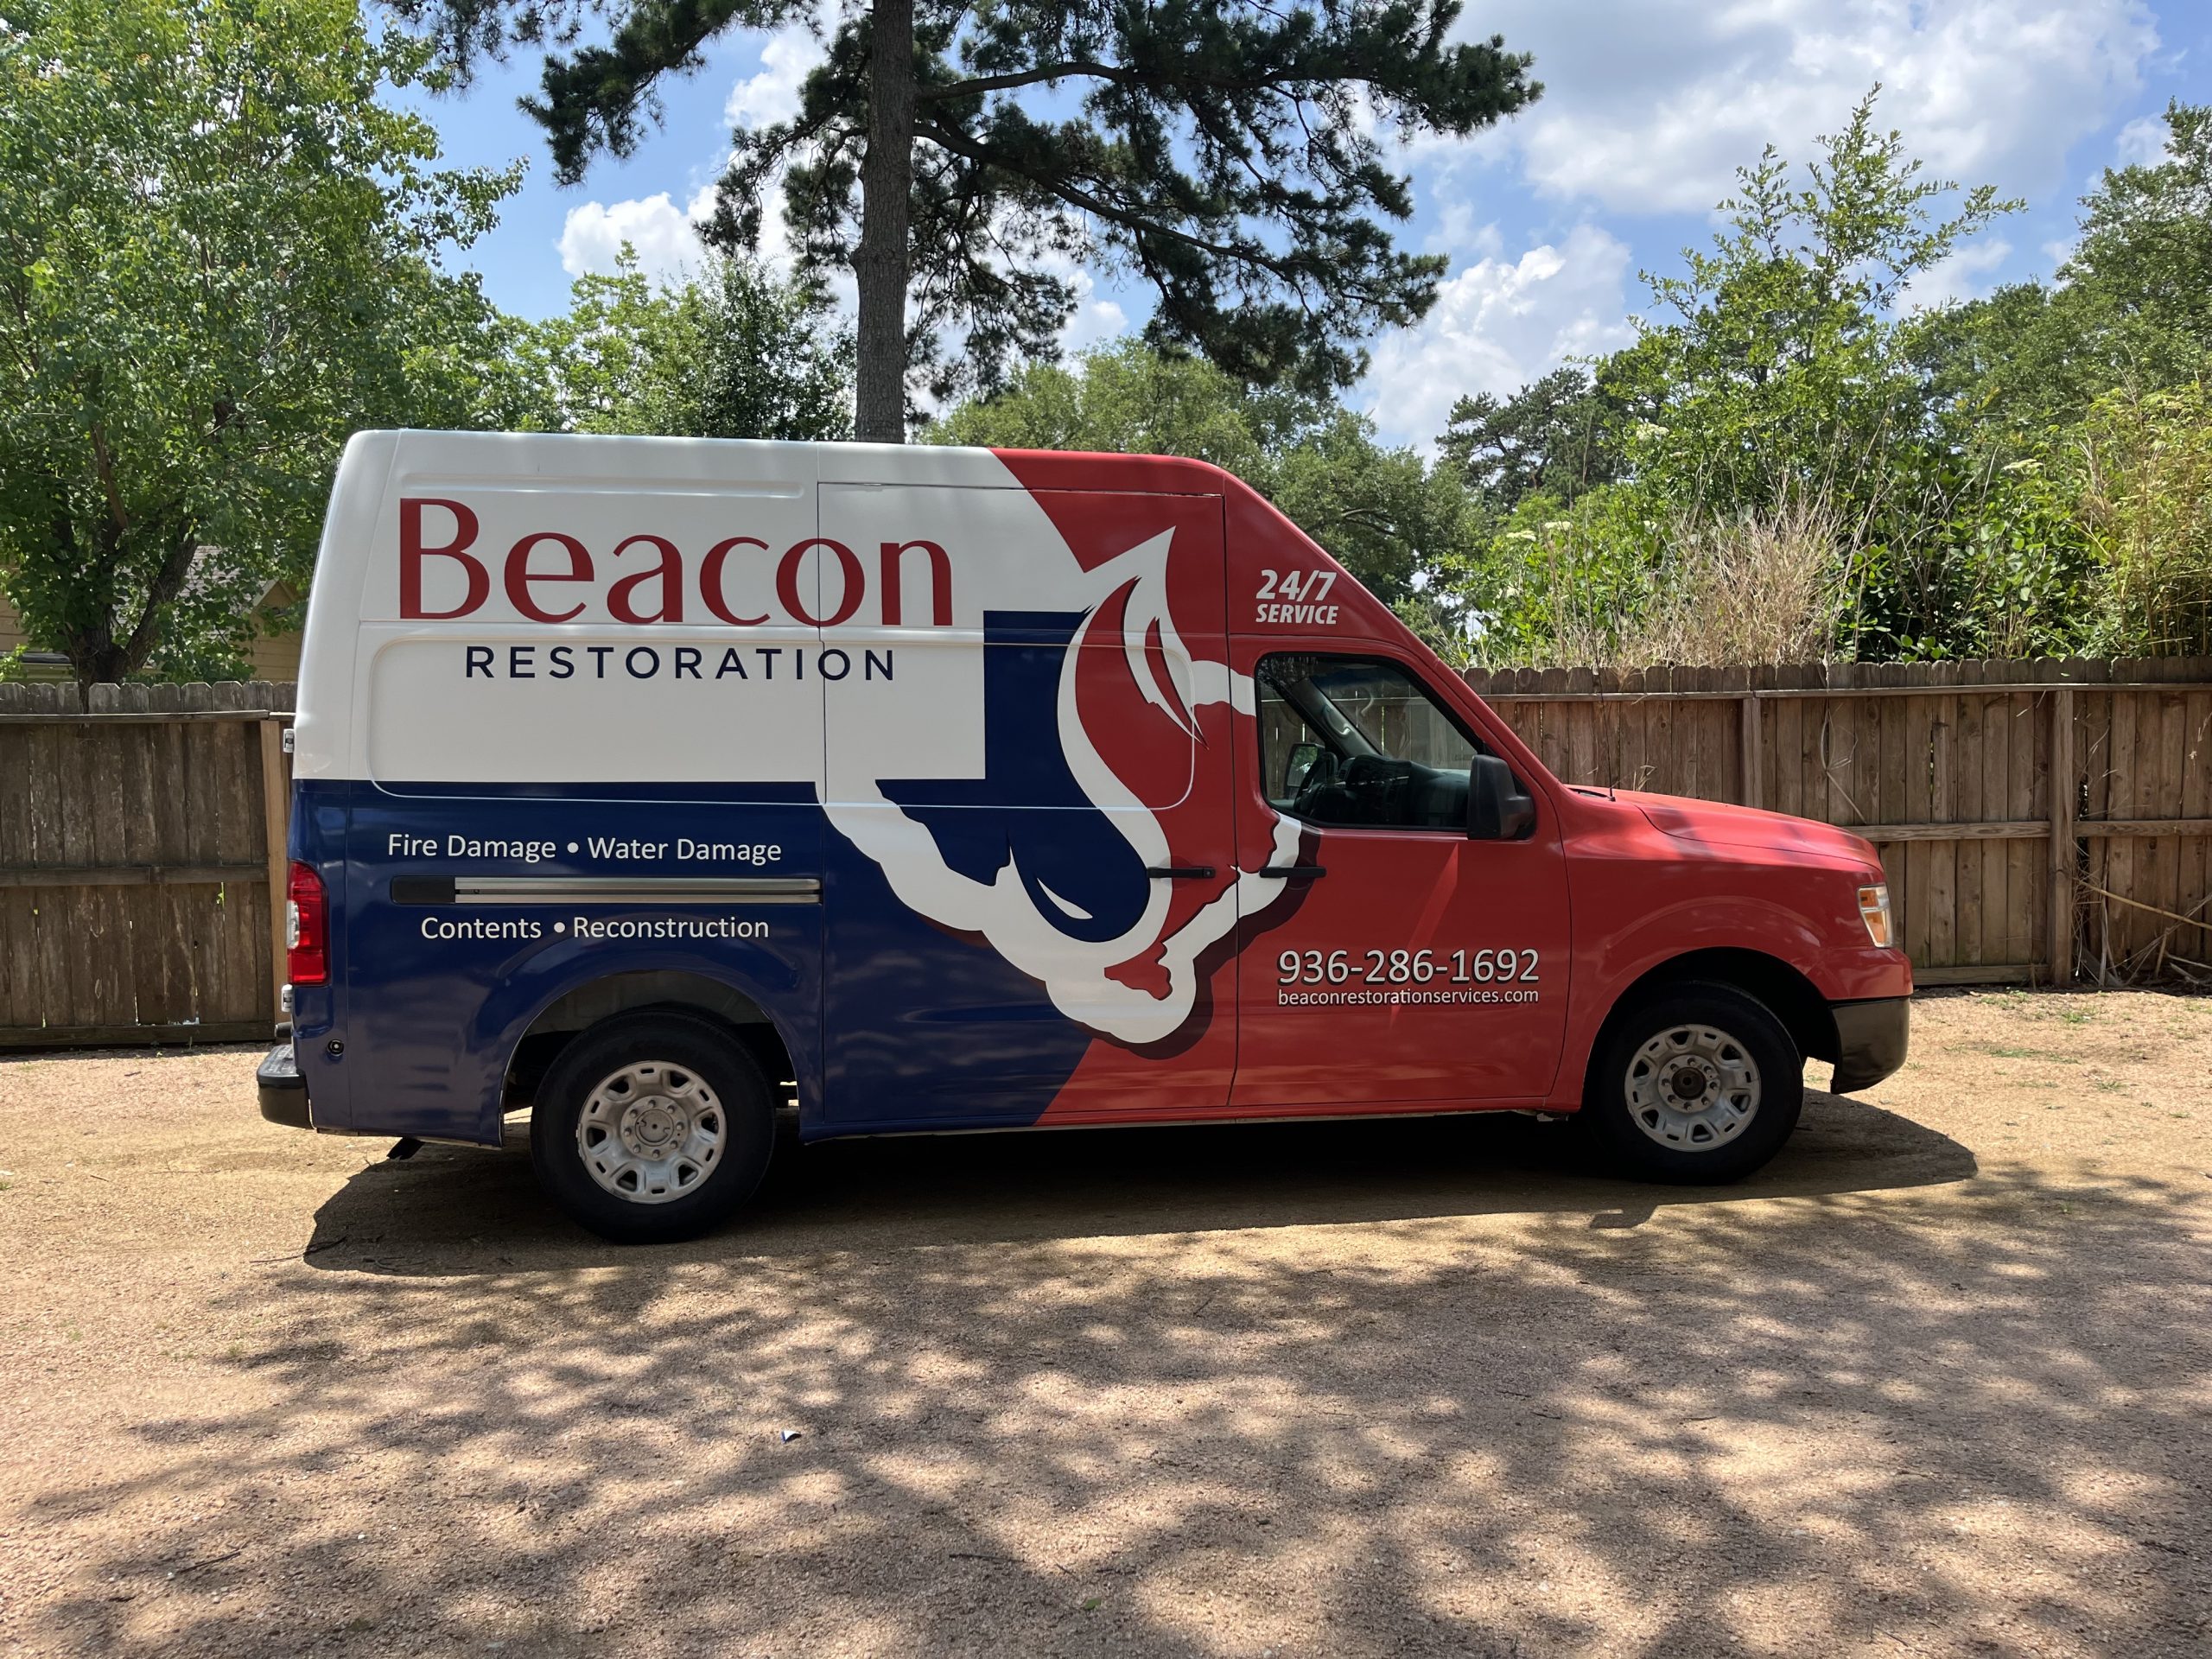 Rapid response vehicle from Beacon Restoration Services, dedicated to providing timely assistance in any commercial water damage concern.